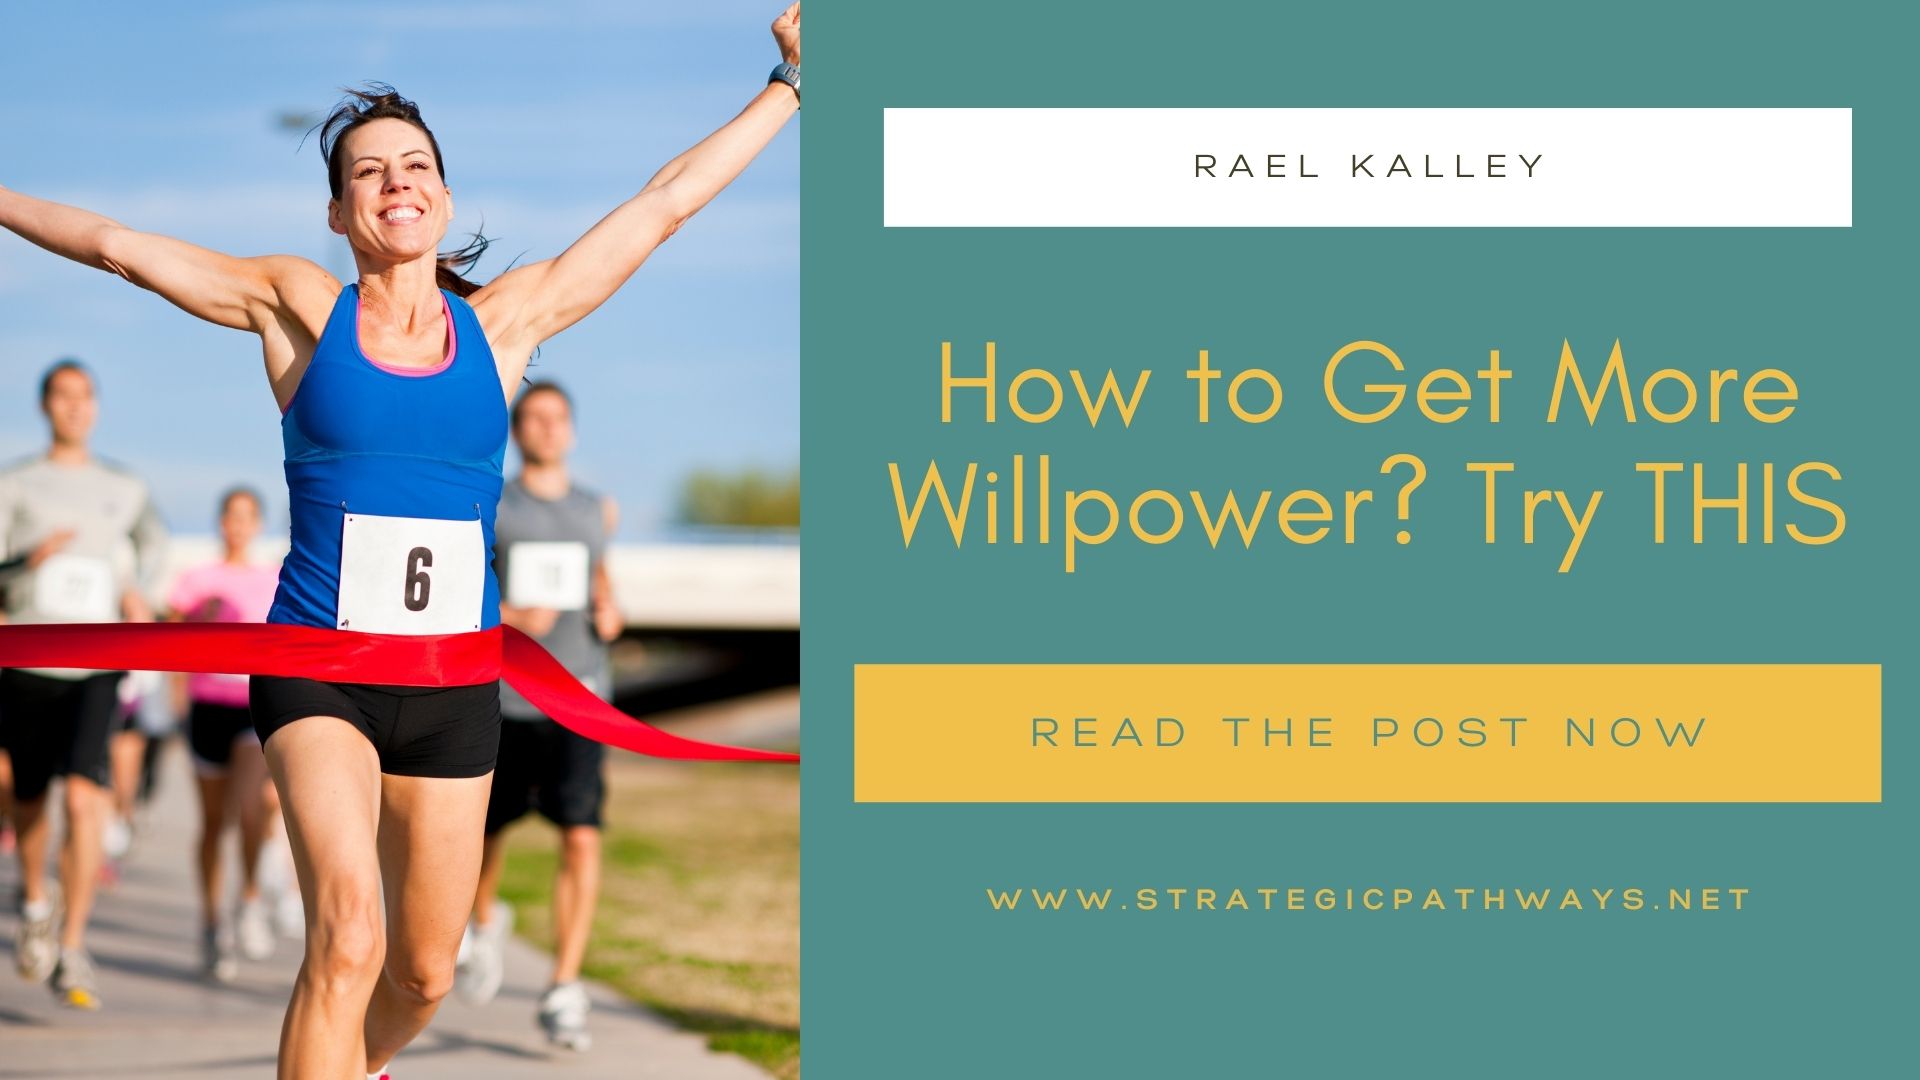 Text reading "How to Get More Willpower? Try THIS" and a woman finishing a race